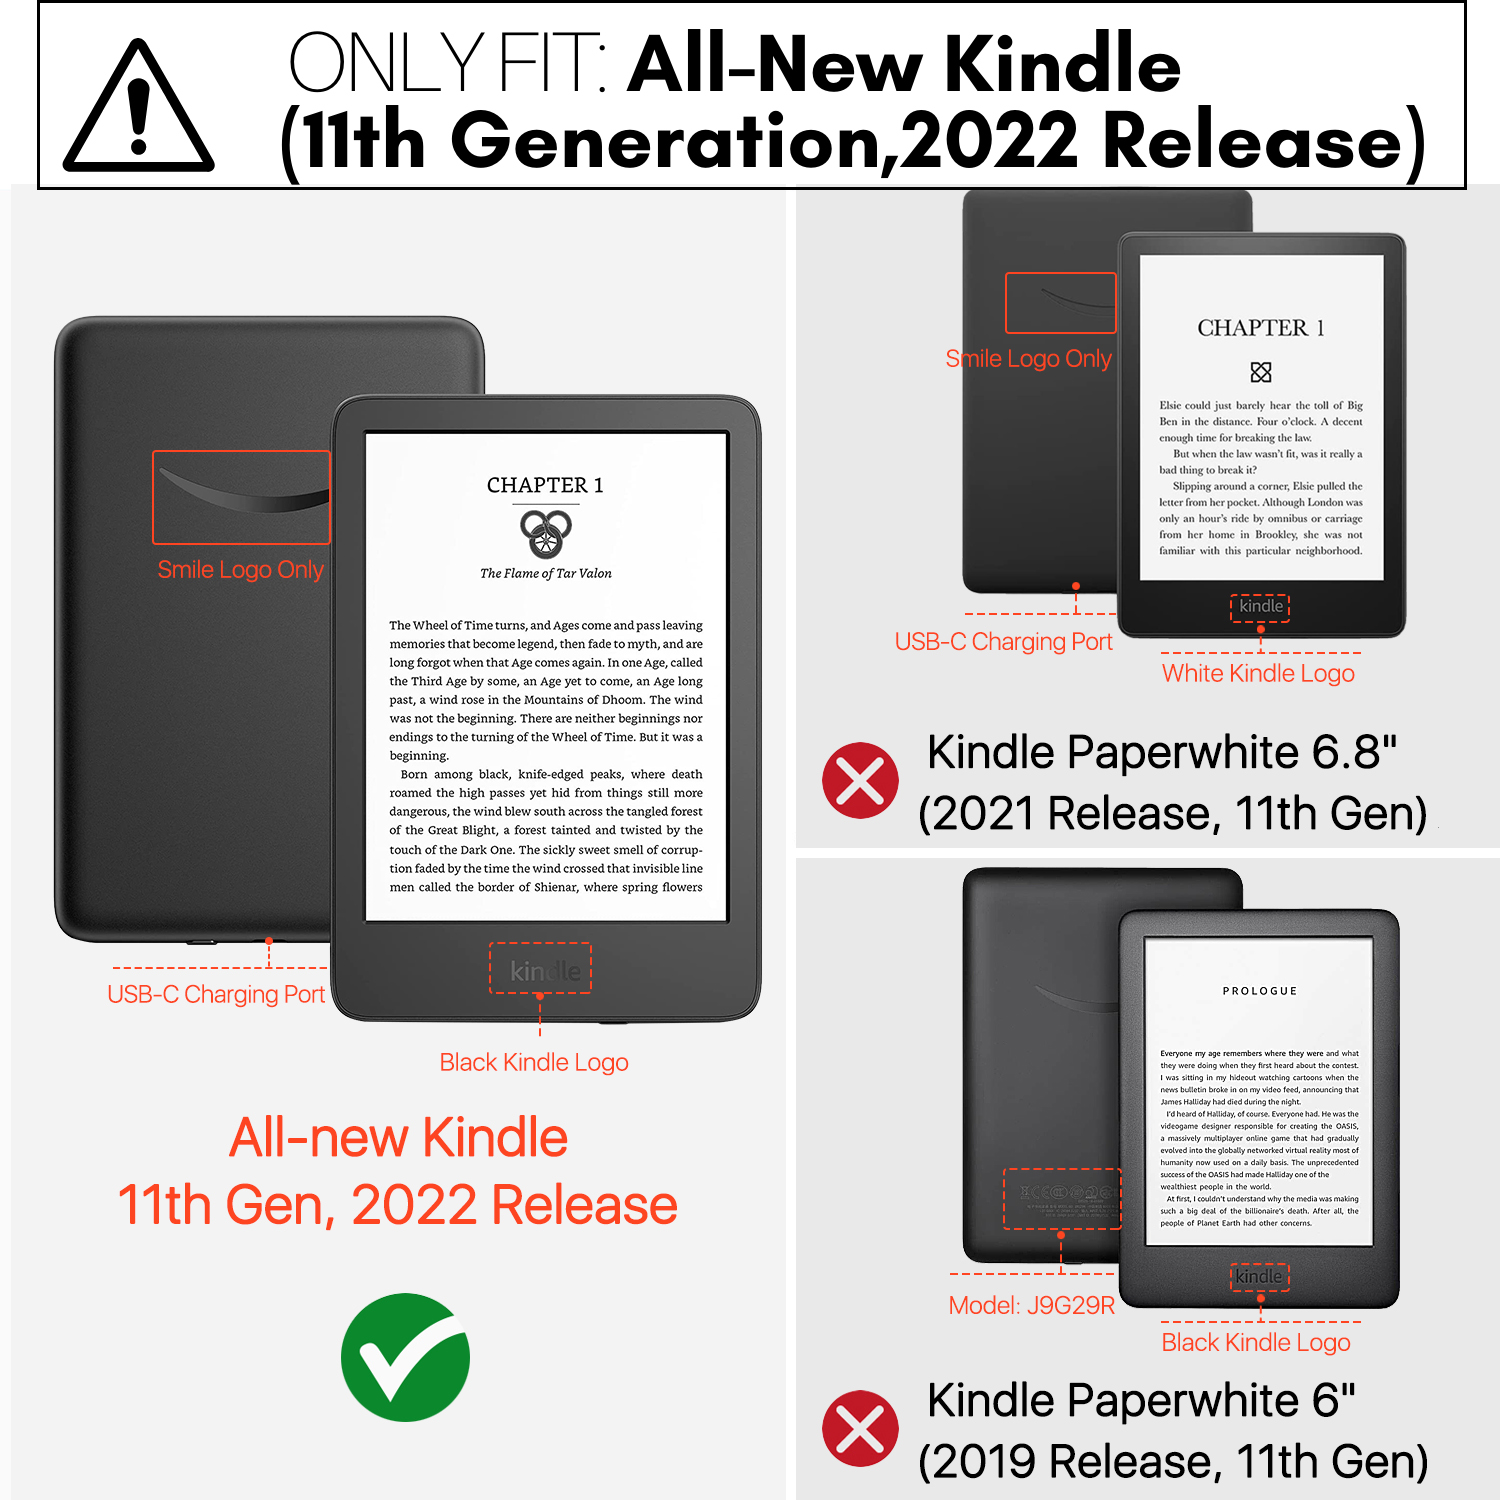 Designed specifically with Auto Wake/Sleep for Amazon All-New Kindle E-reader (6" Display, 11th Generation 2022 Release)